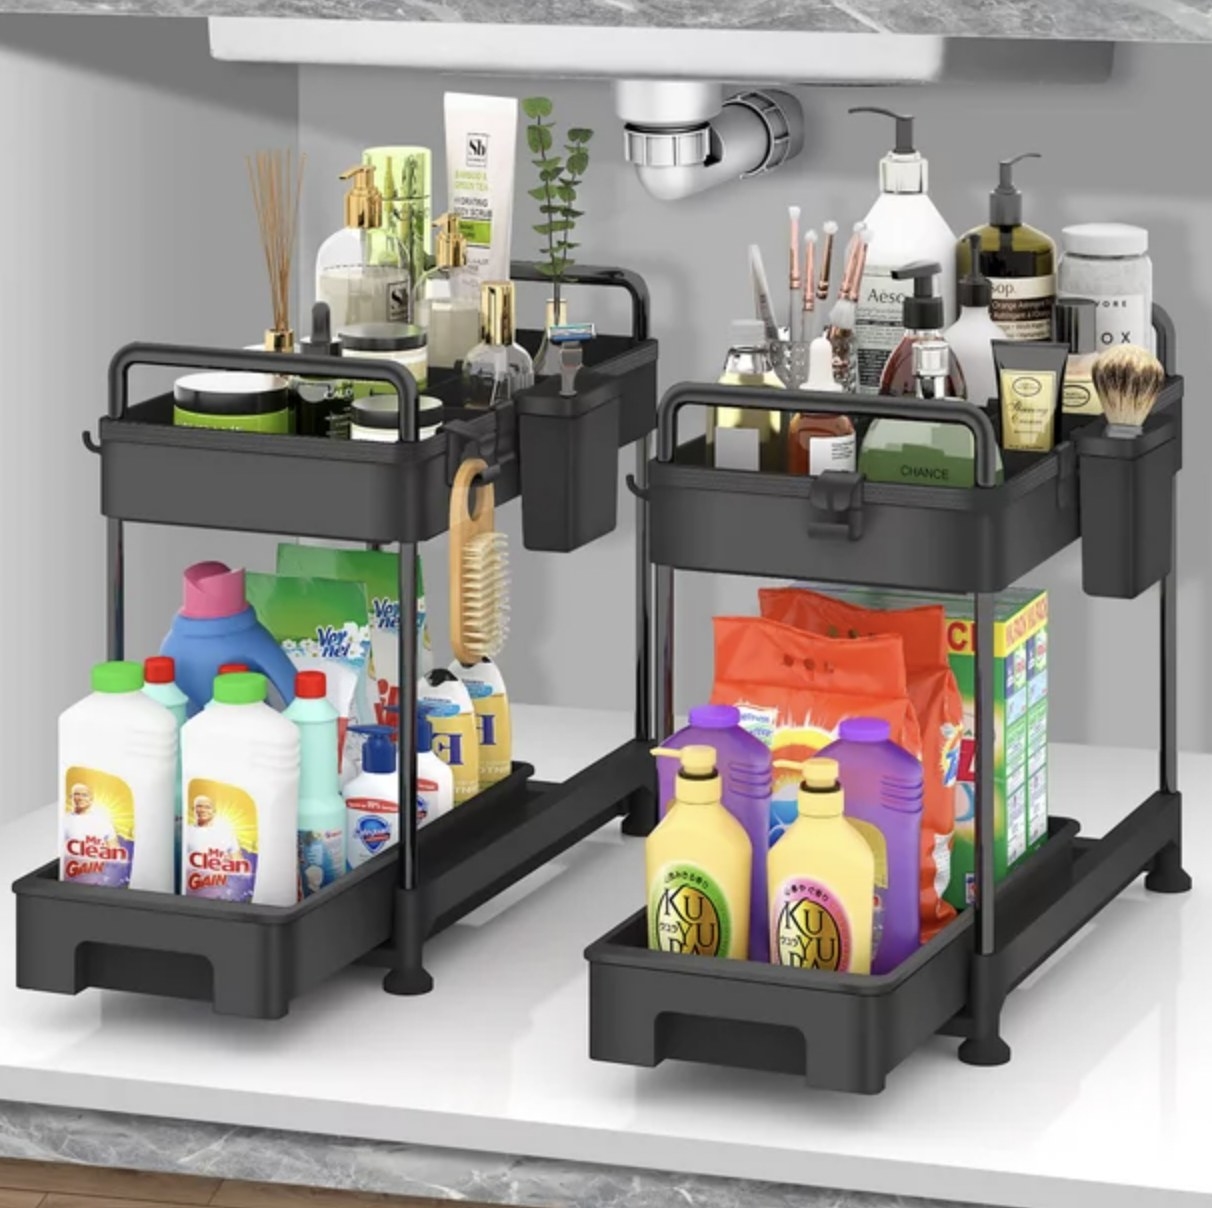 Two under the sink organizers